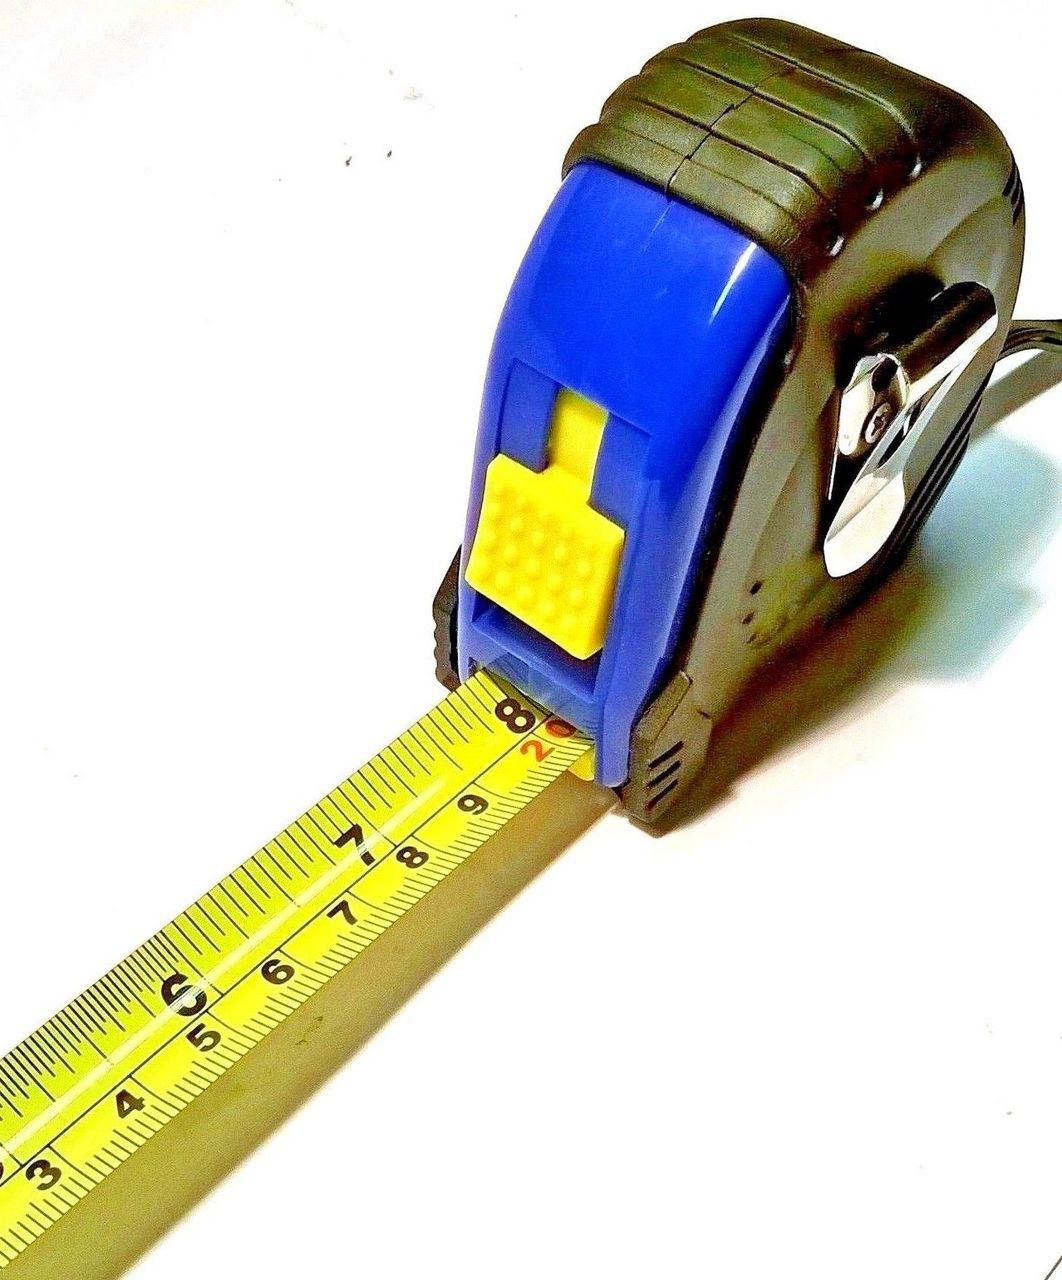 Quality 5 m x 19mm Tape Measure / Measuring Tape Metric & Imperial MS123 NEW